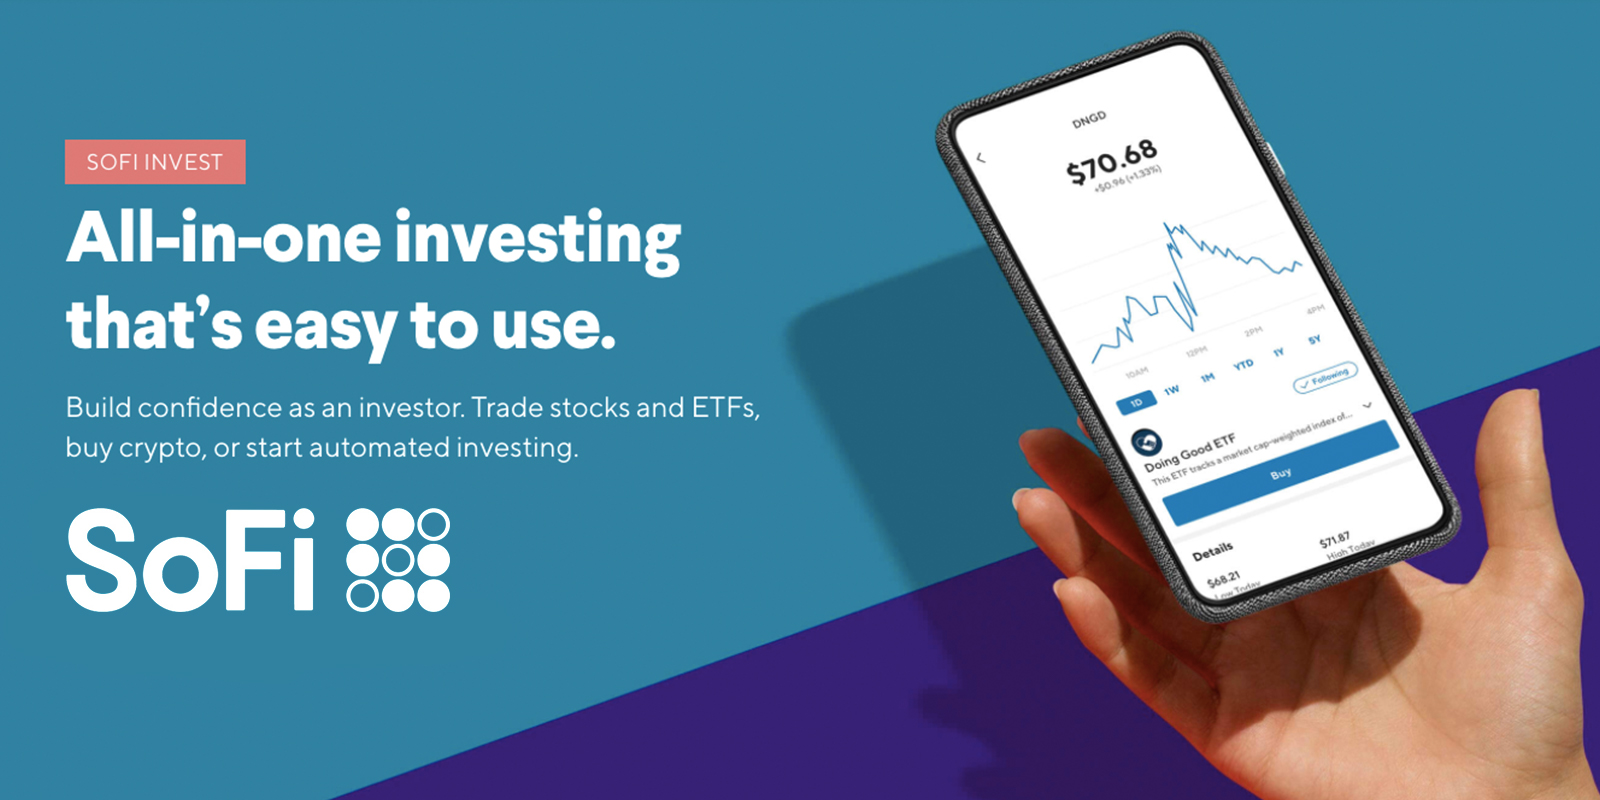 5 best stock trading apps for iPhone - Top Tech News